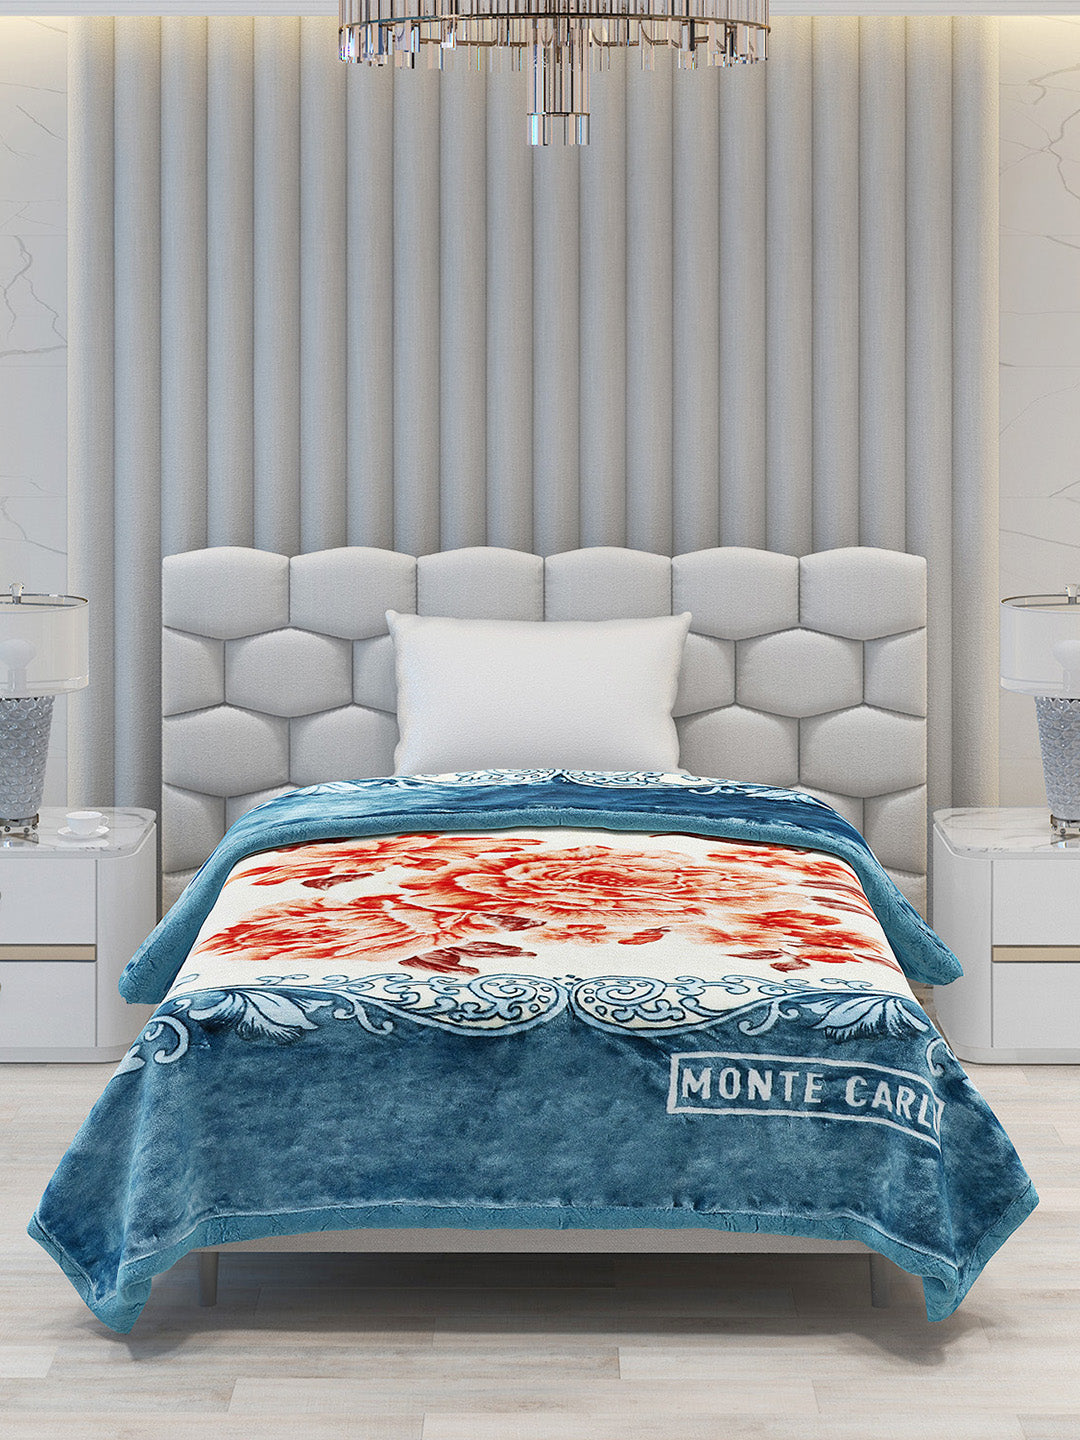 Printed Single Bed Blanket for Heavy Winter -3 Ply